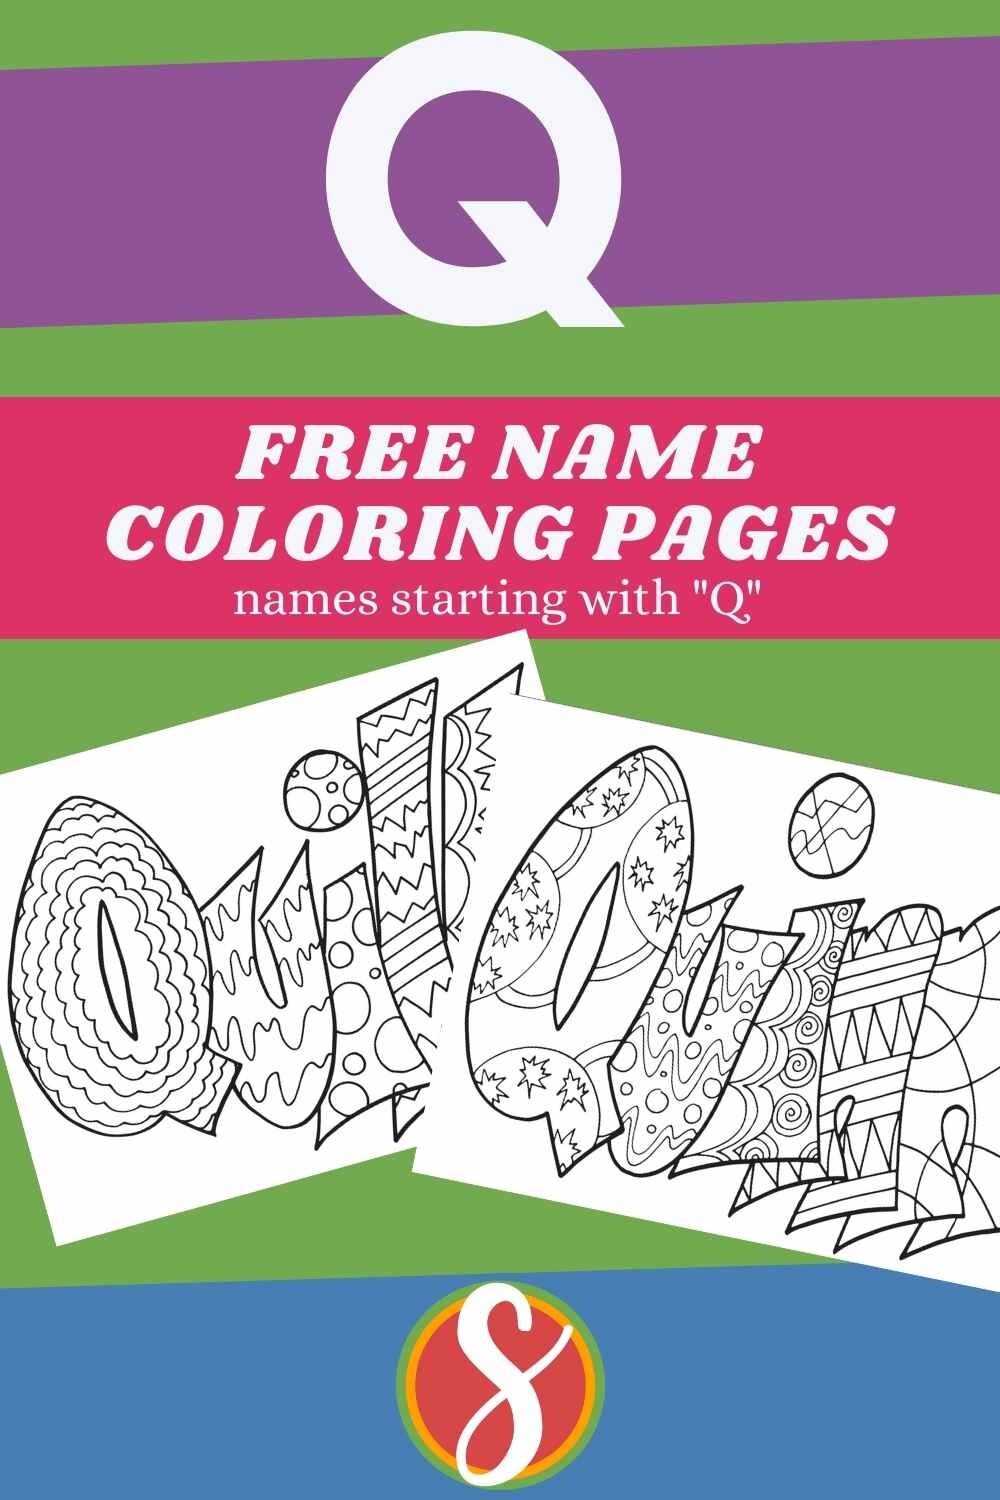 free name coloring letter q.jpg